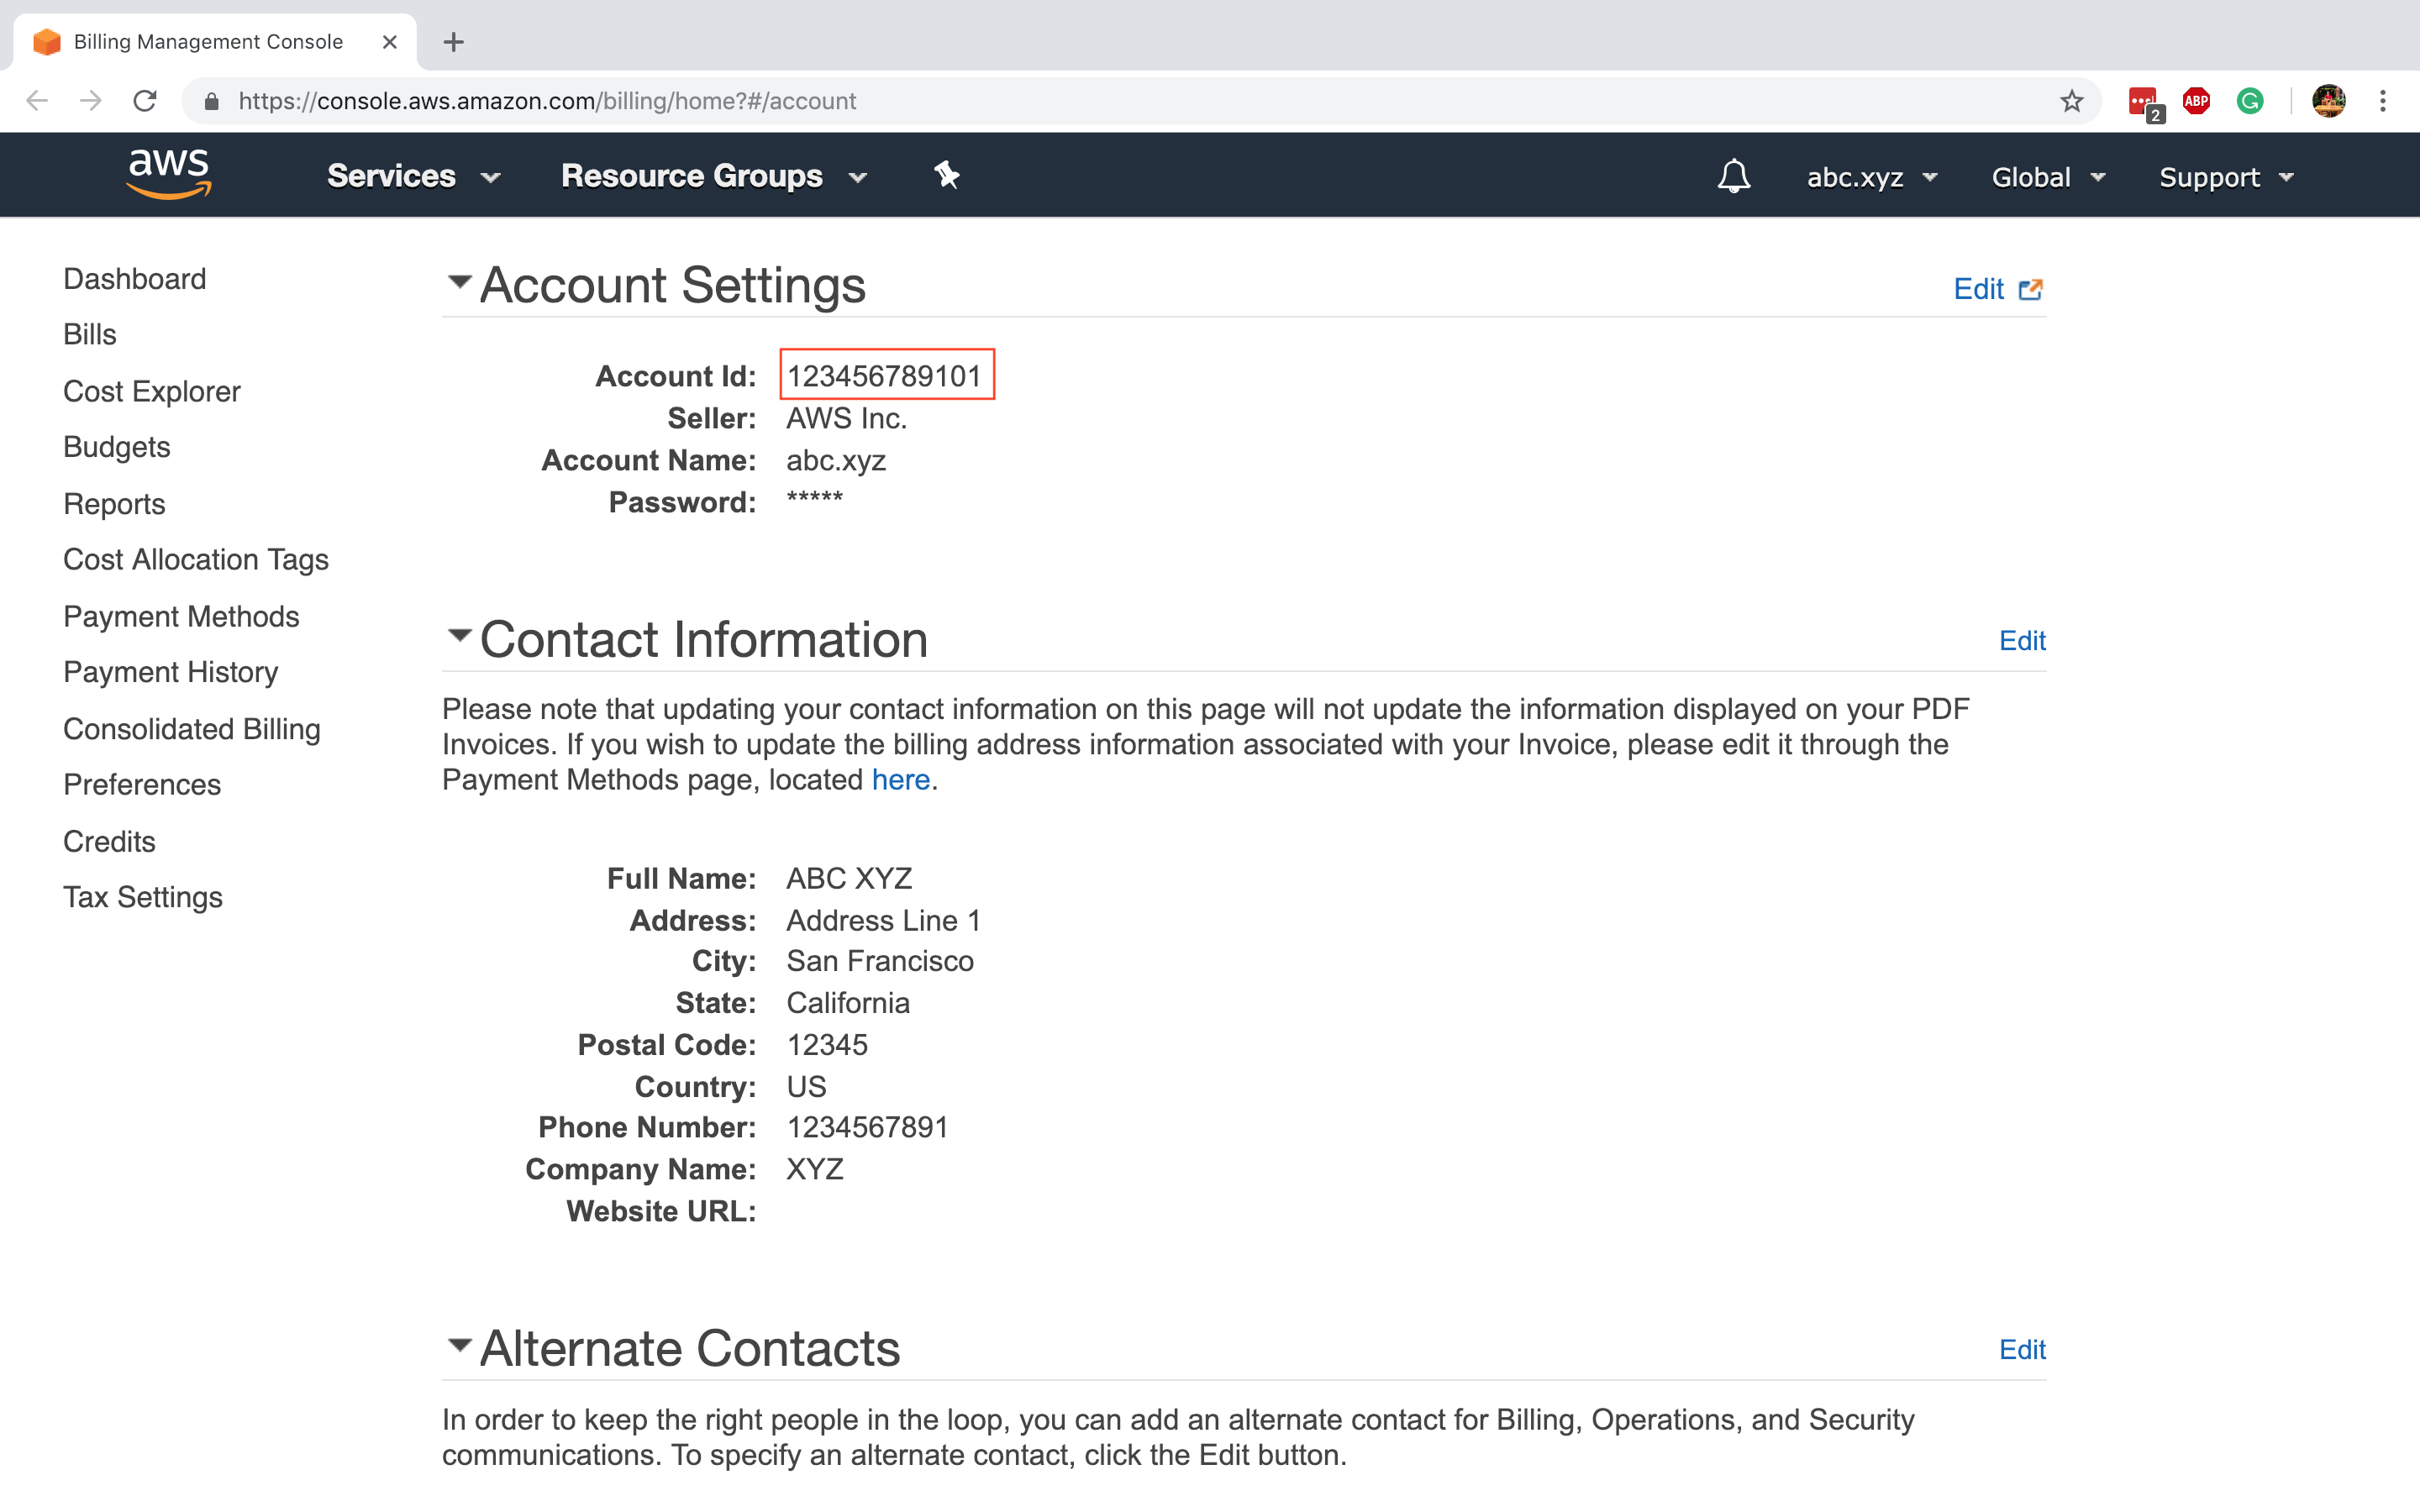 A screen capture of the My Account window of a sample AWS account